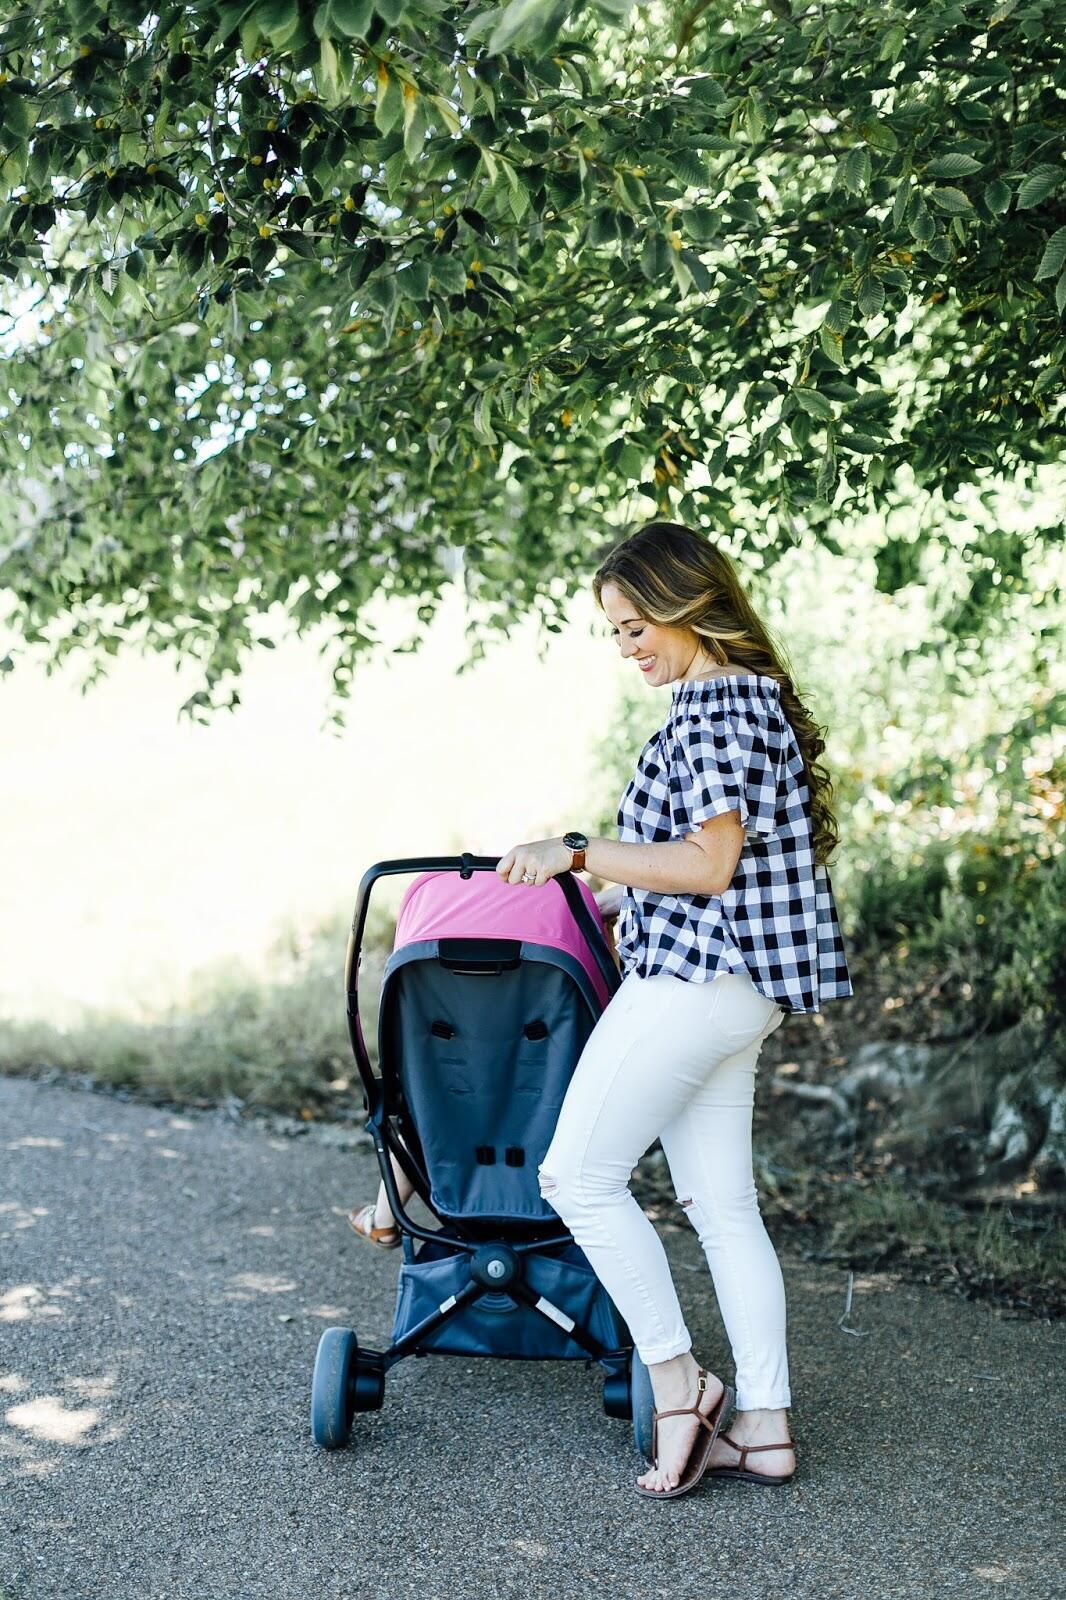 5 Activities For Toddlers on Stroller Walks by popular lifestyle blogger Laura of Walking in Memphis in High Heels